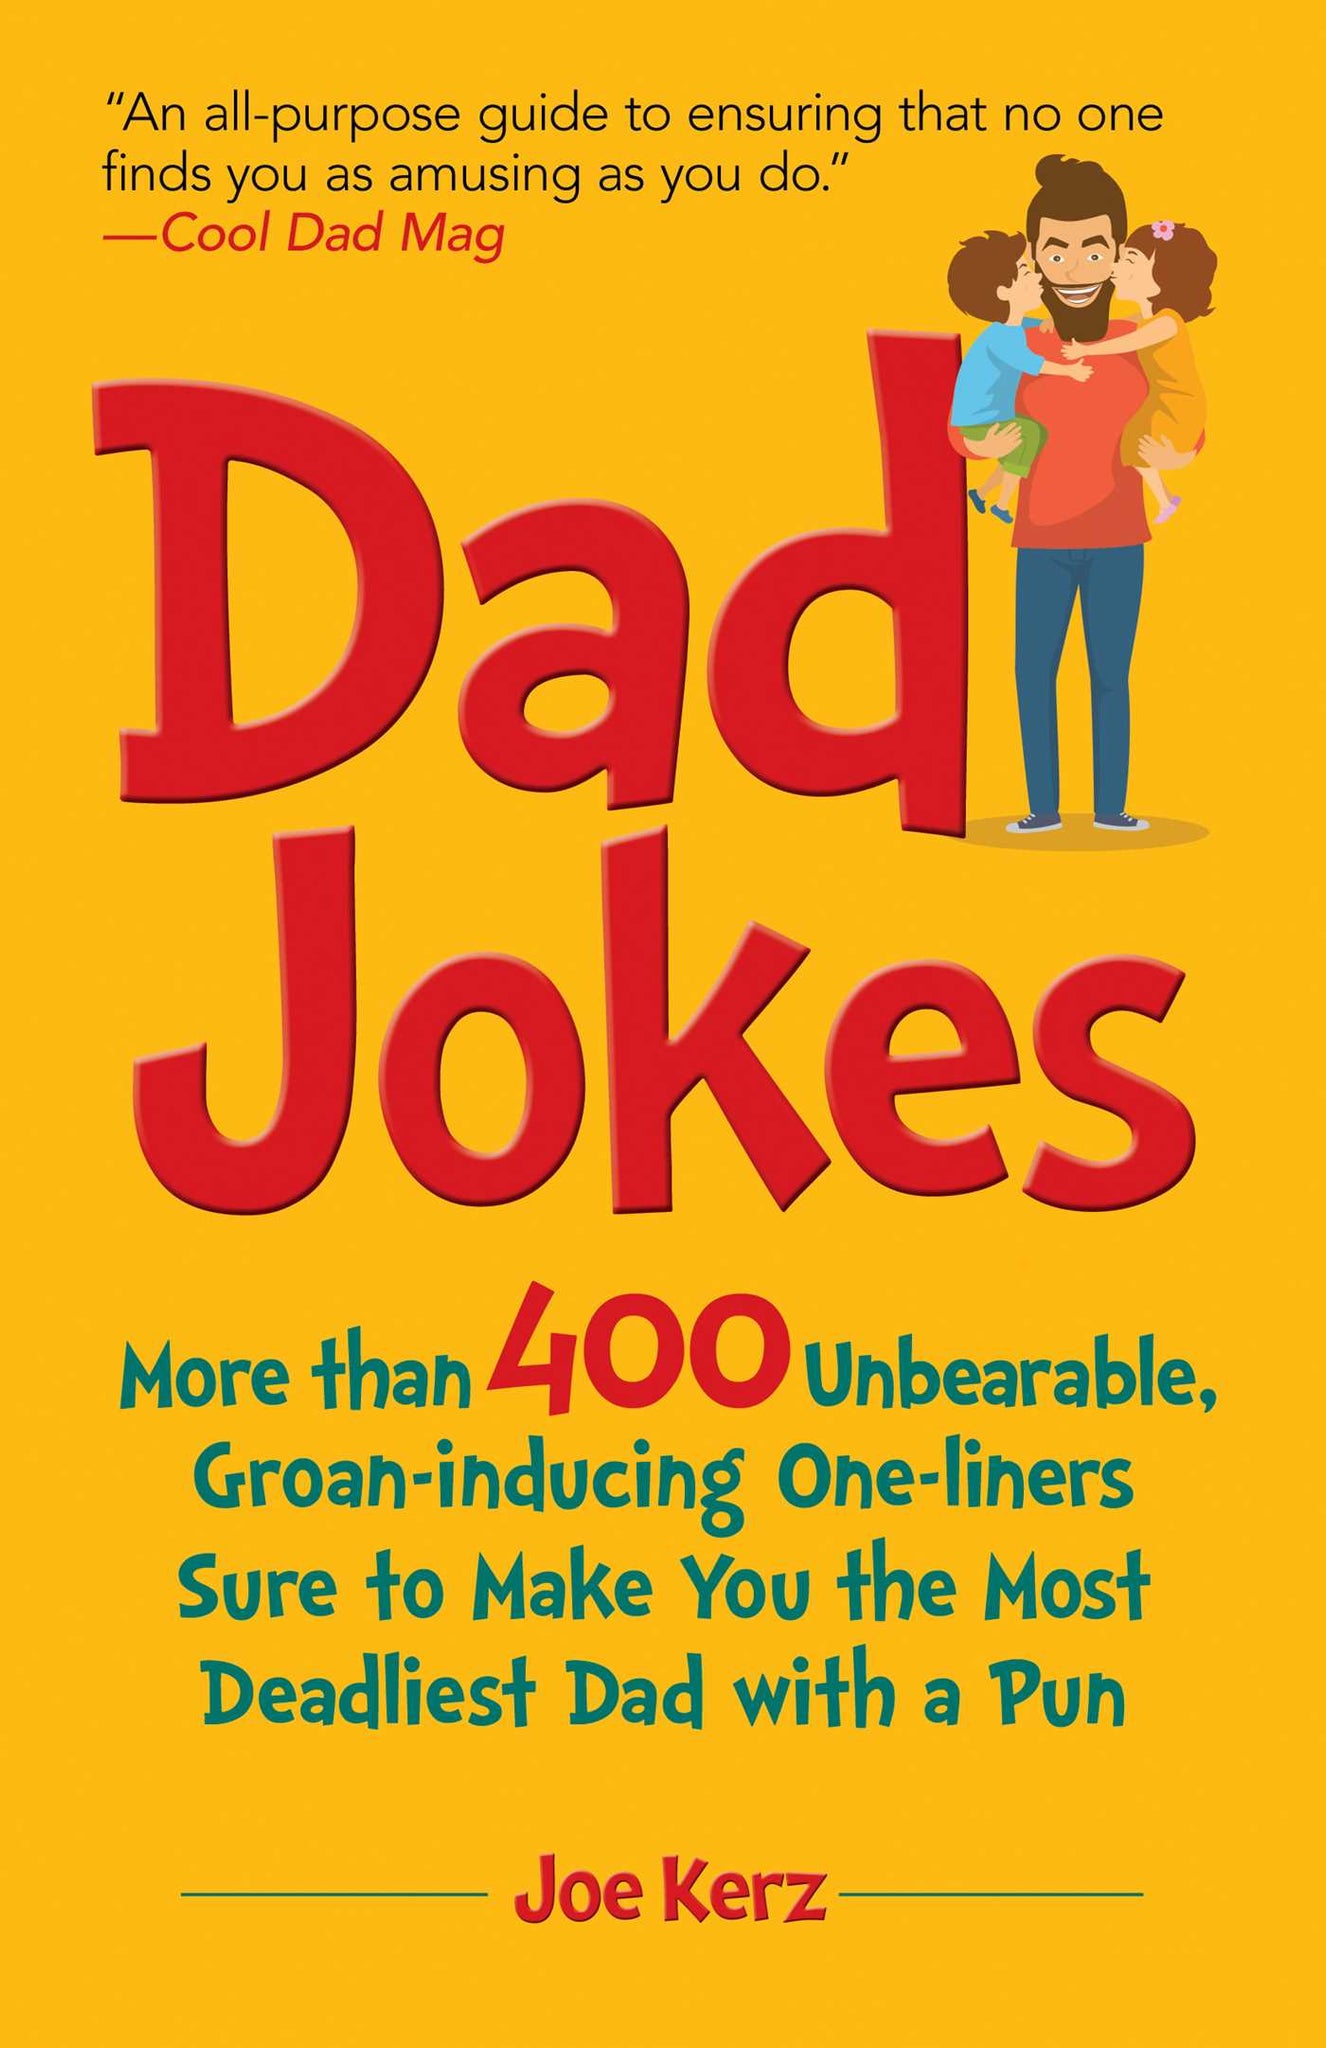 Dad Jokes : More Than 400 Unbearable, Groan-Inducing One-Liners Sure to Make You the Deadliest Dad With a Pun